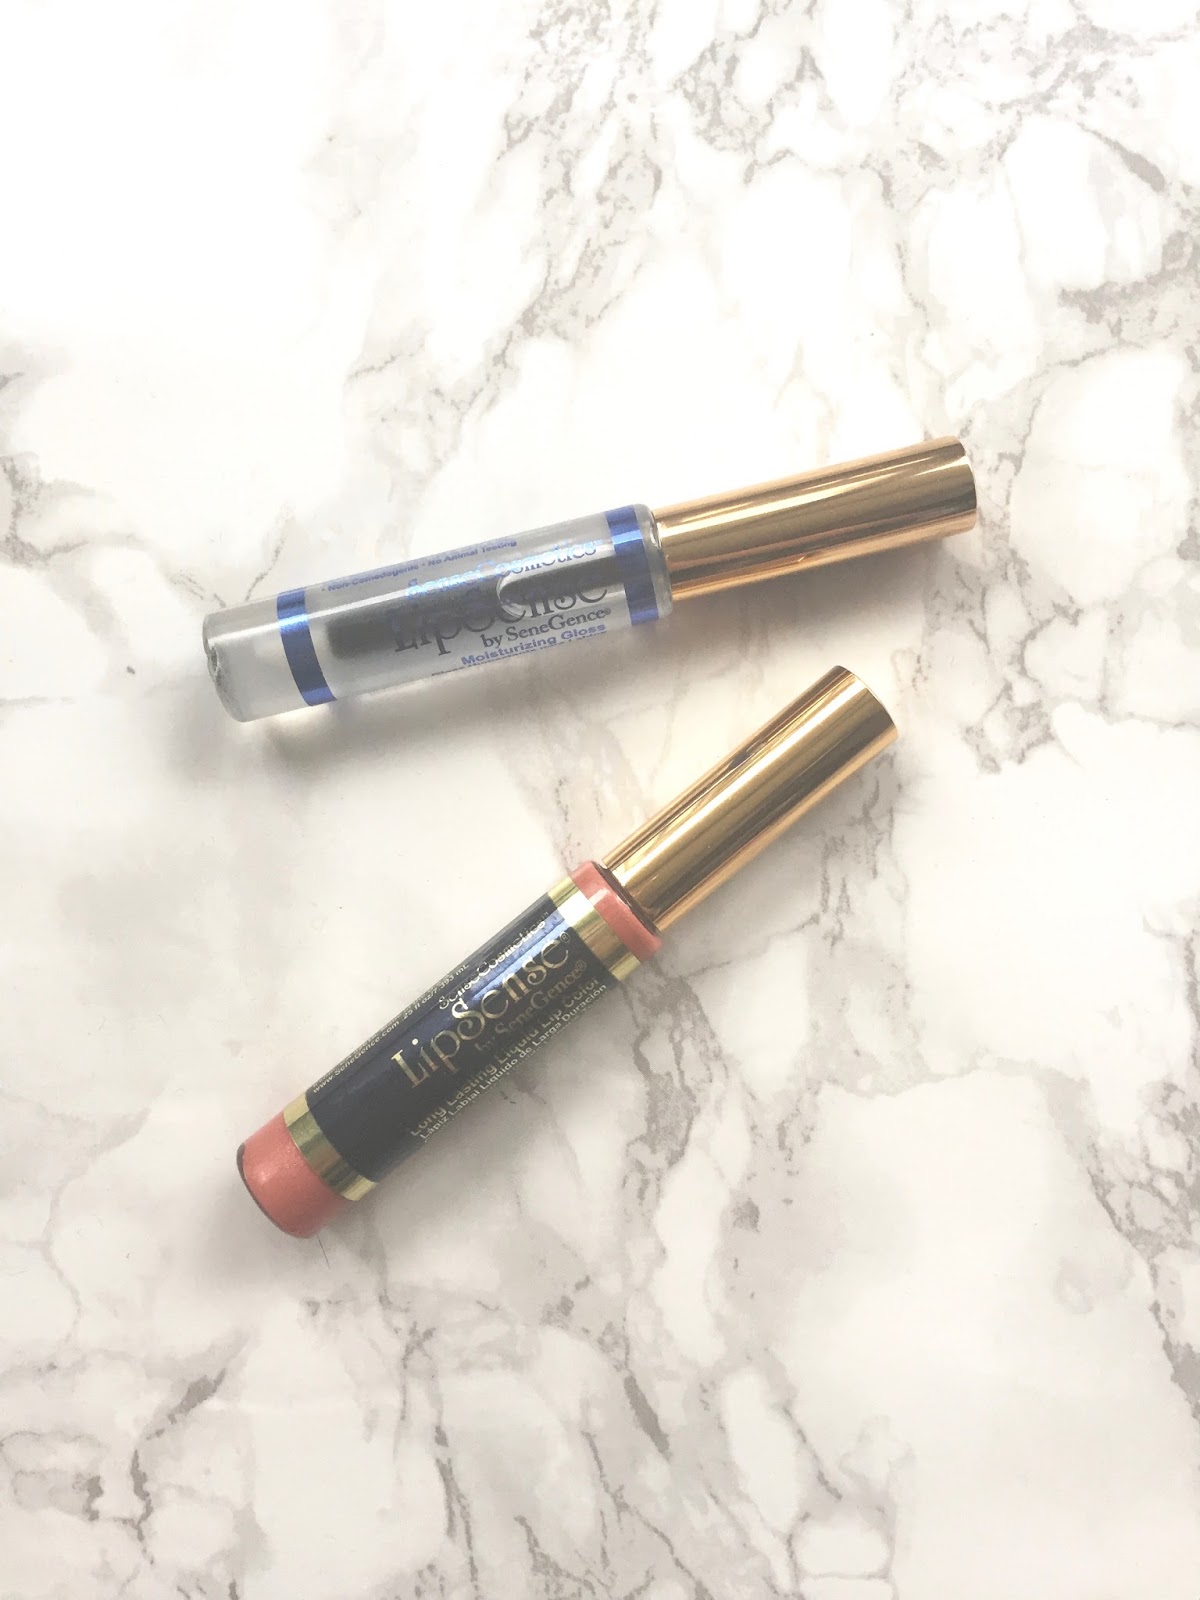 lipsense review for work day